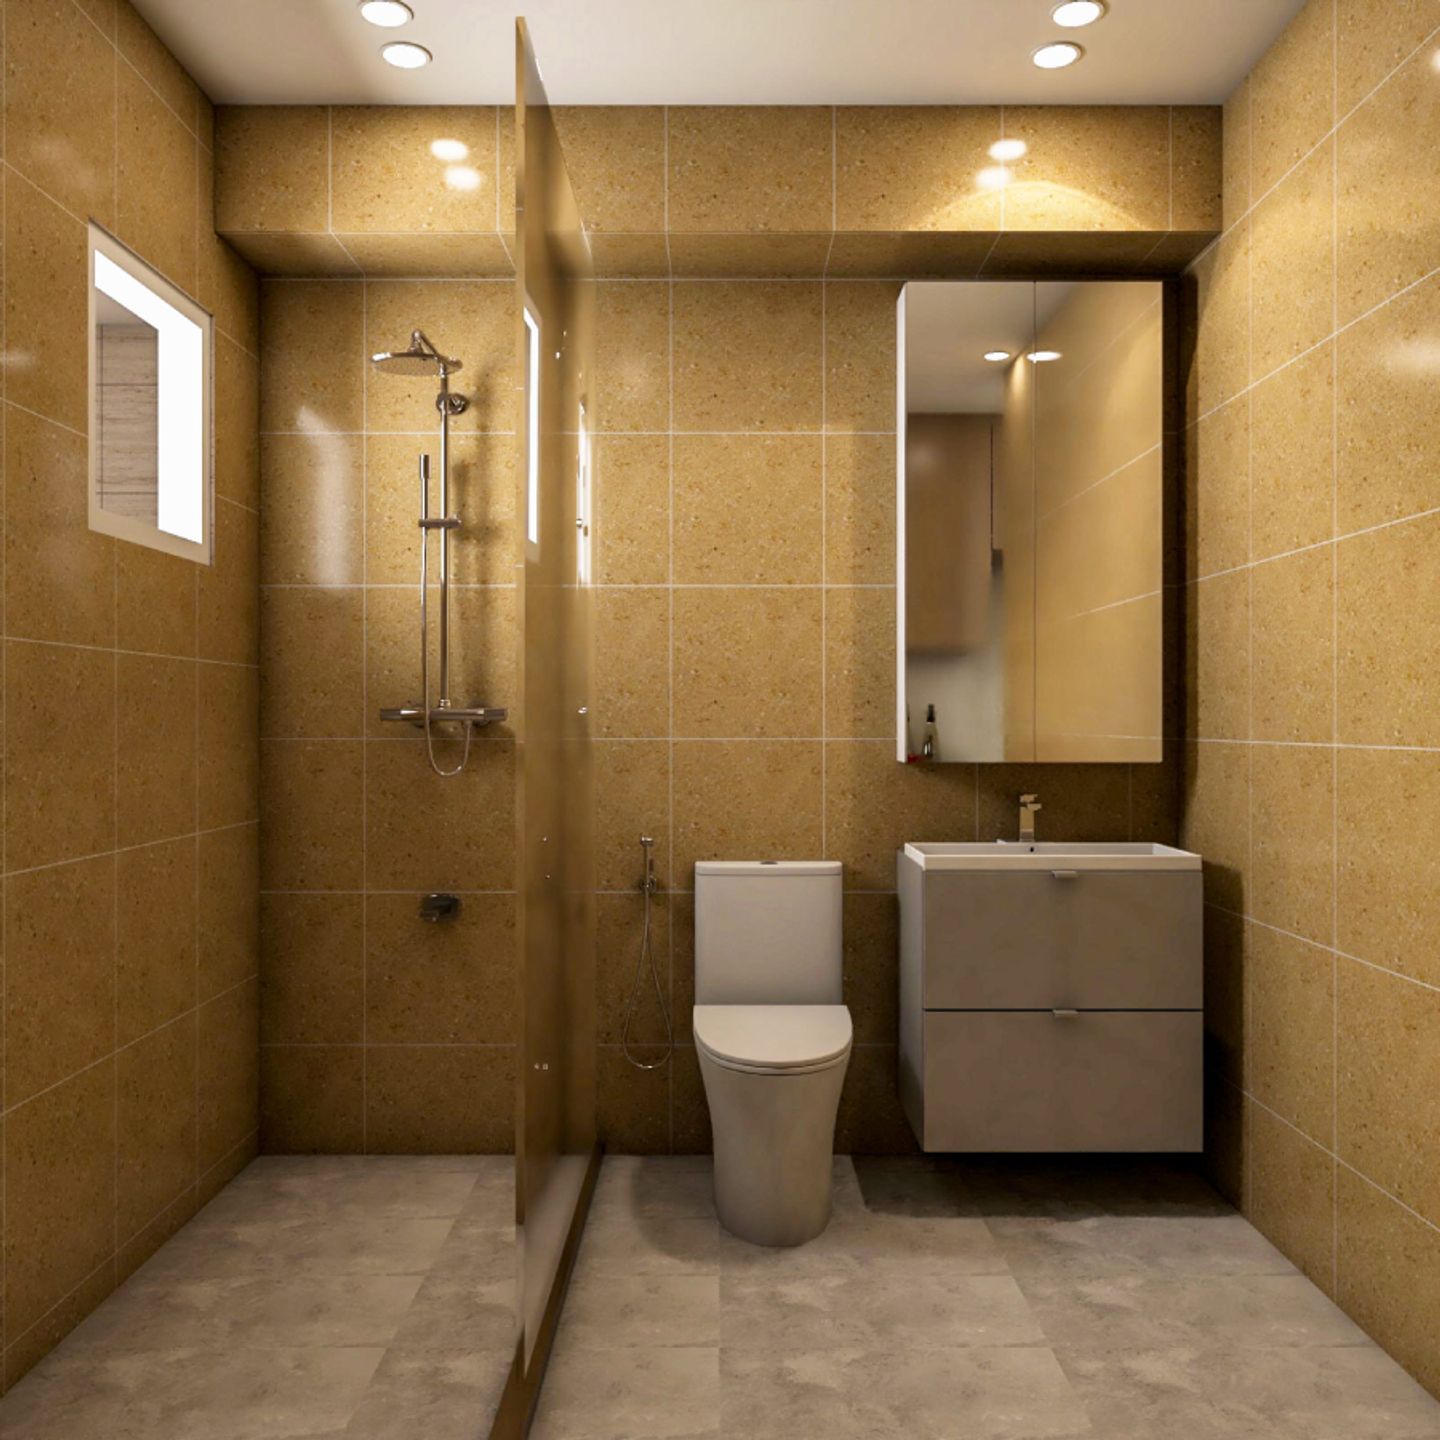 Contemporary Design With A Beige Wall Dado And A Shower Unit - Livspace